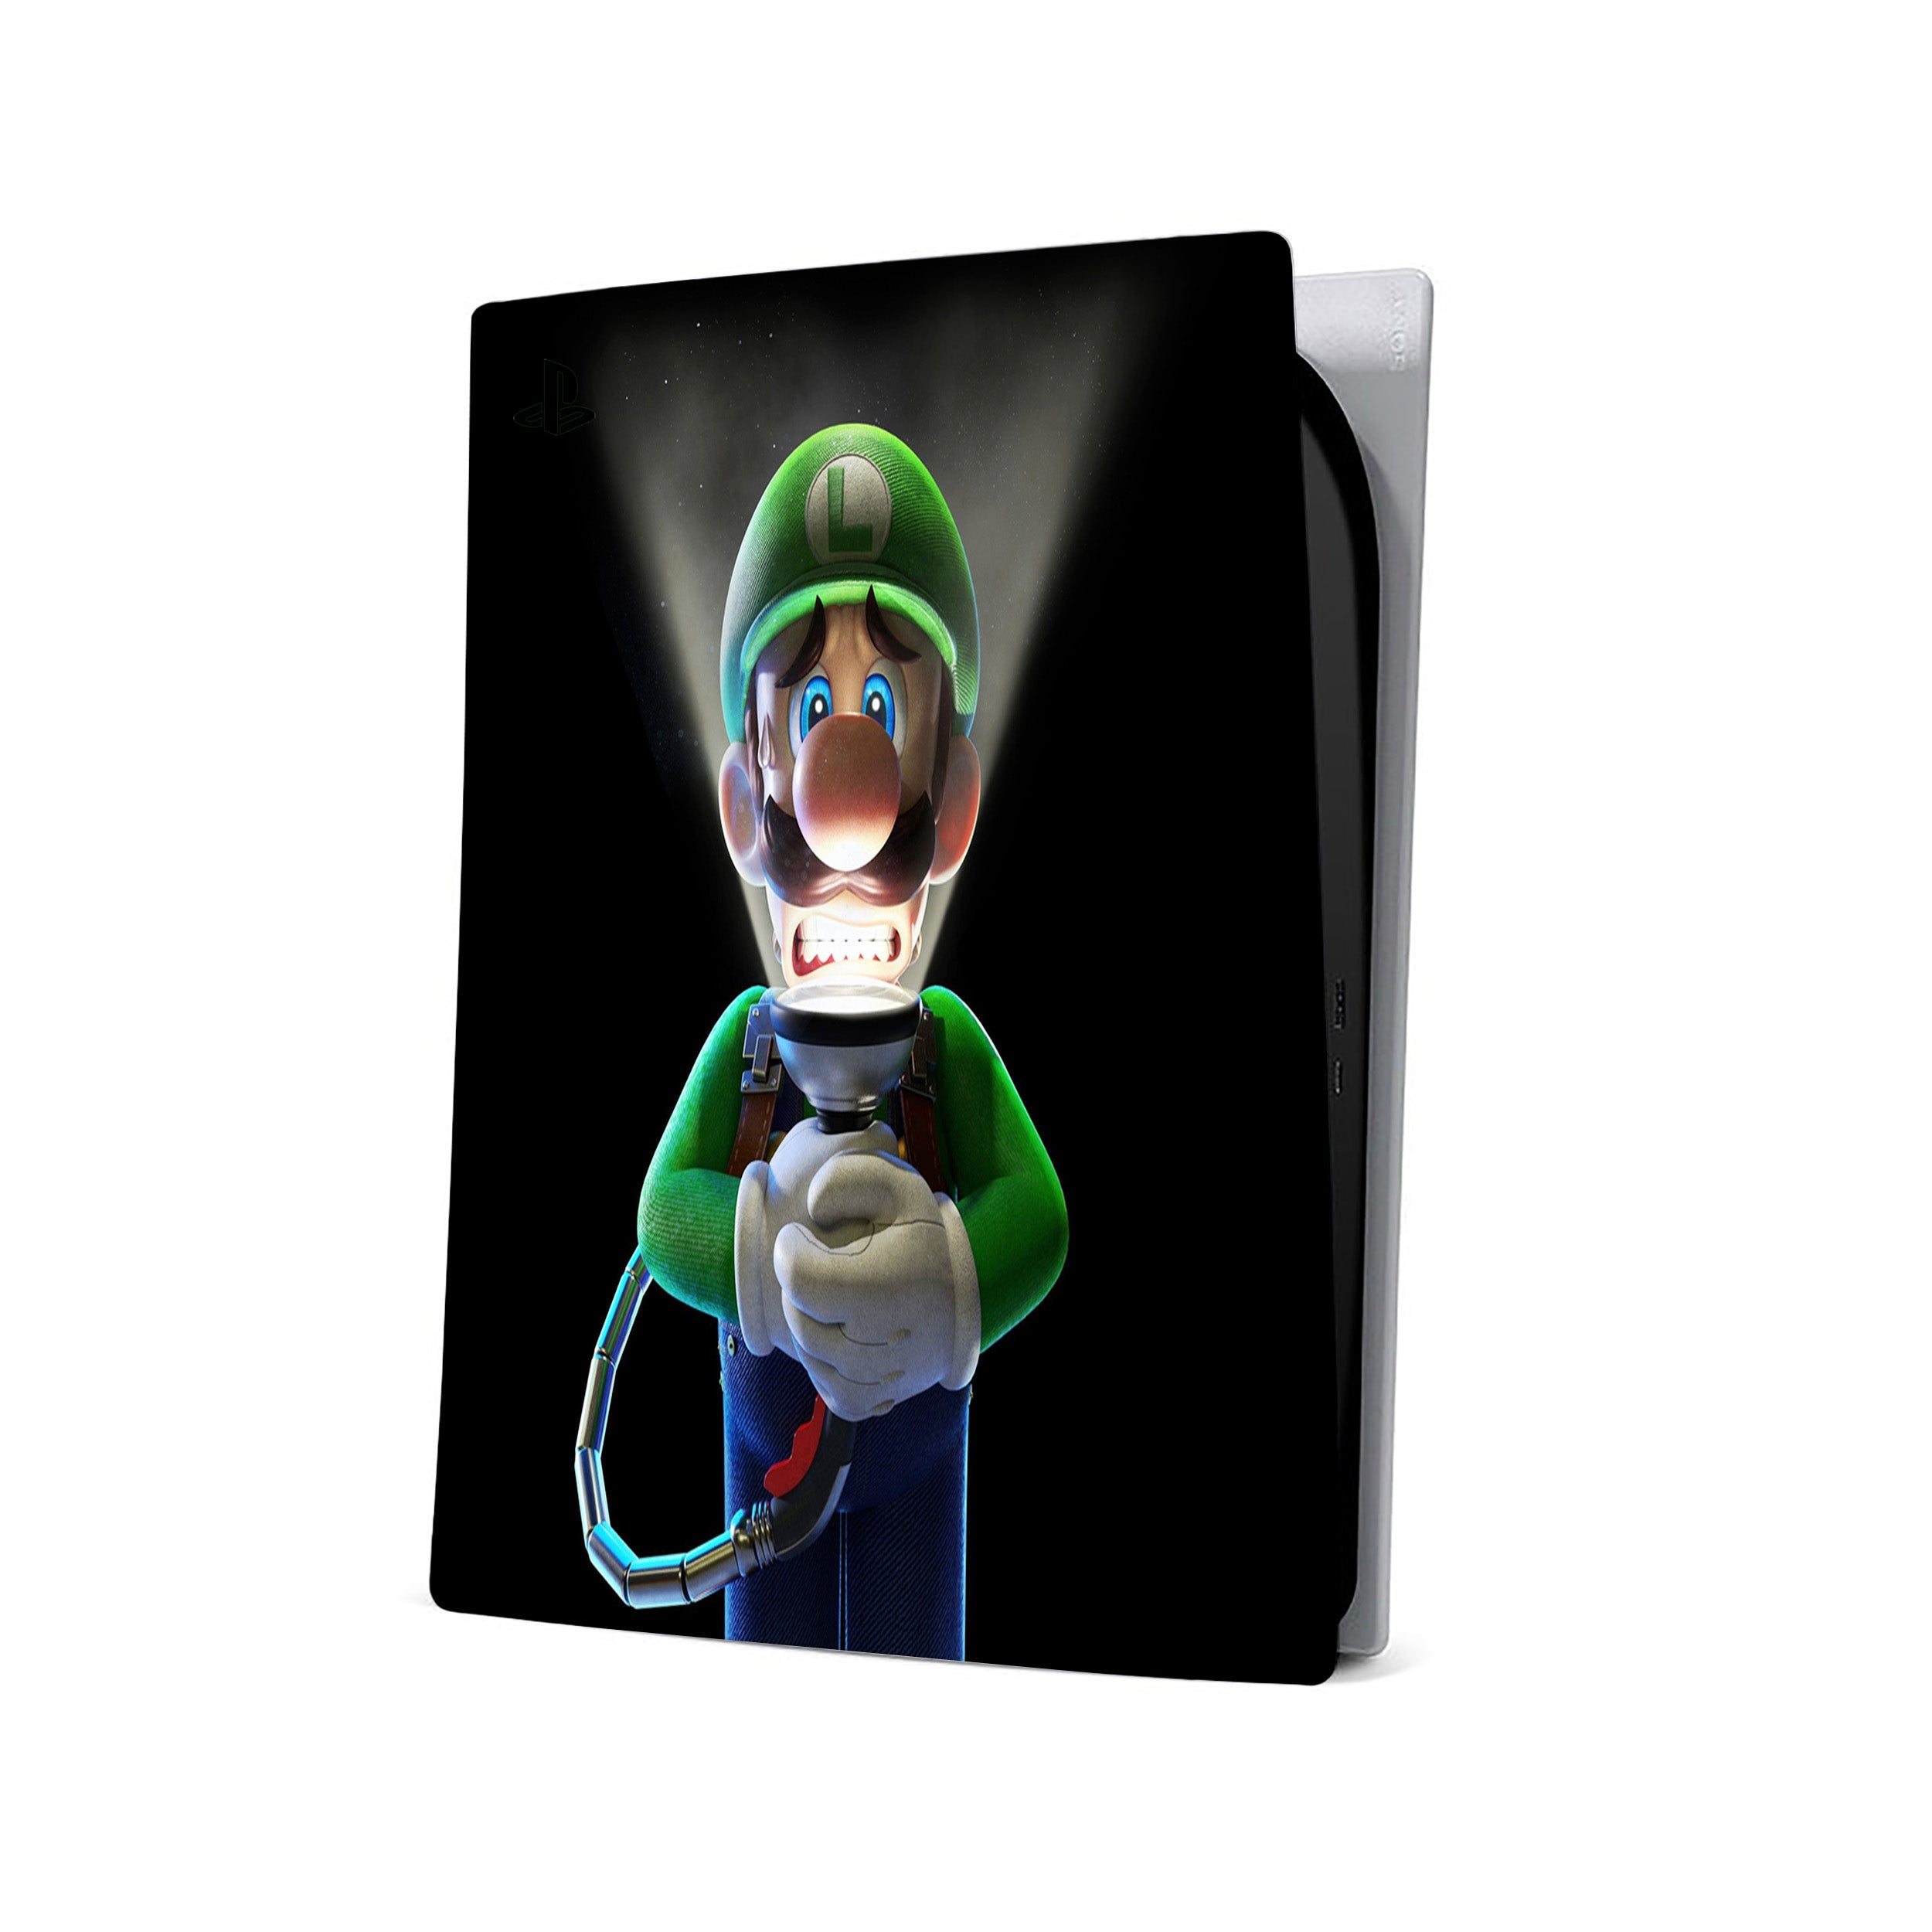 A video game skin featuring a Luigi design for the PS5.